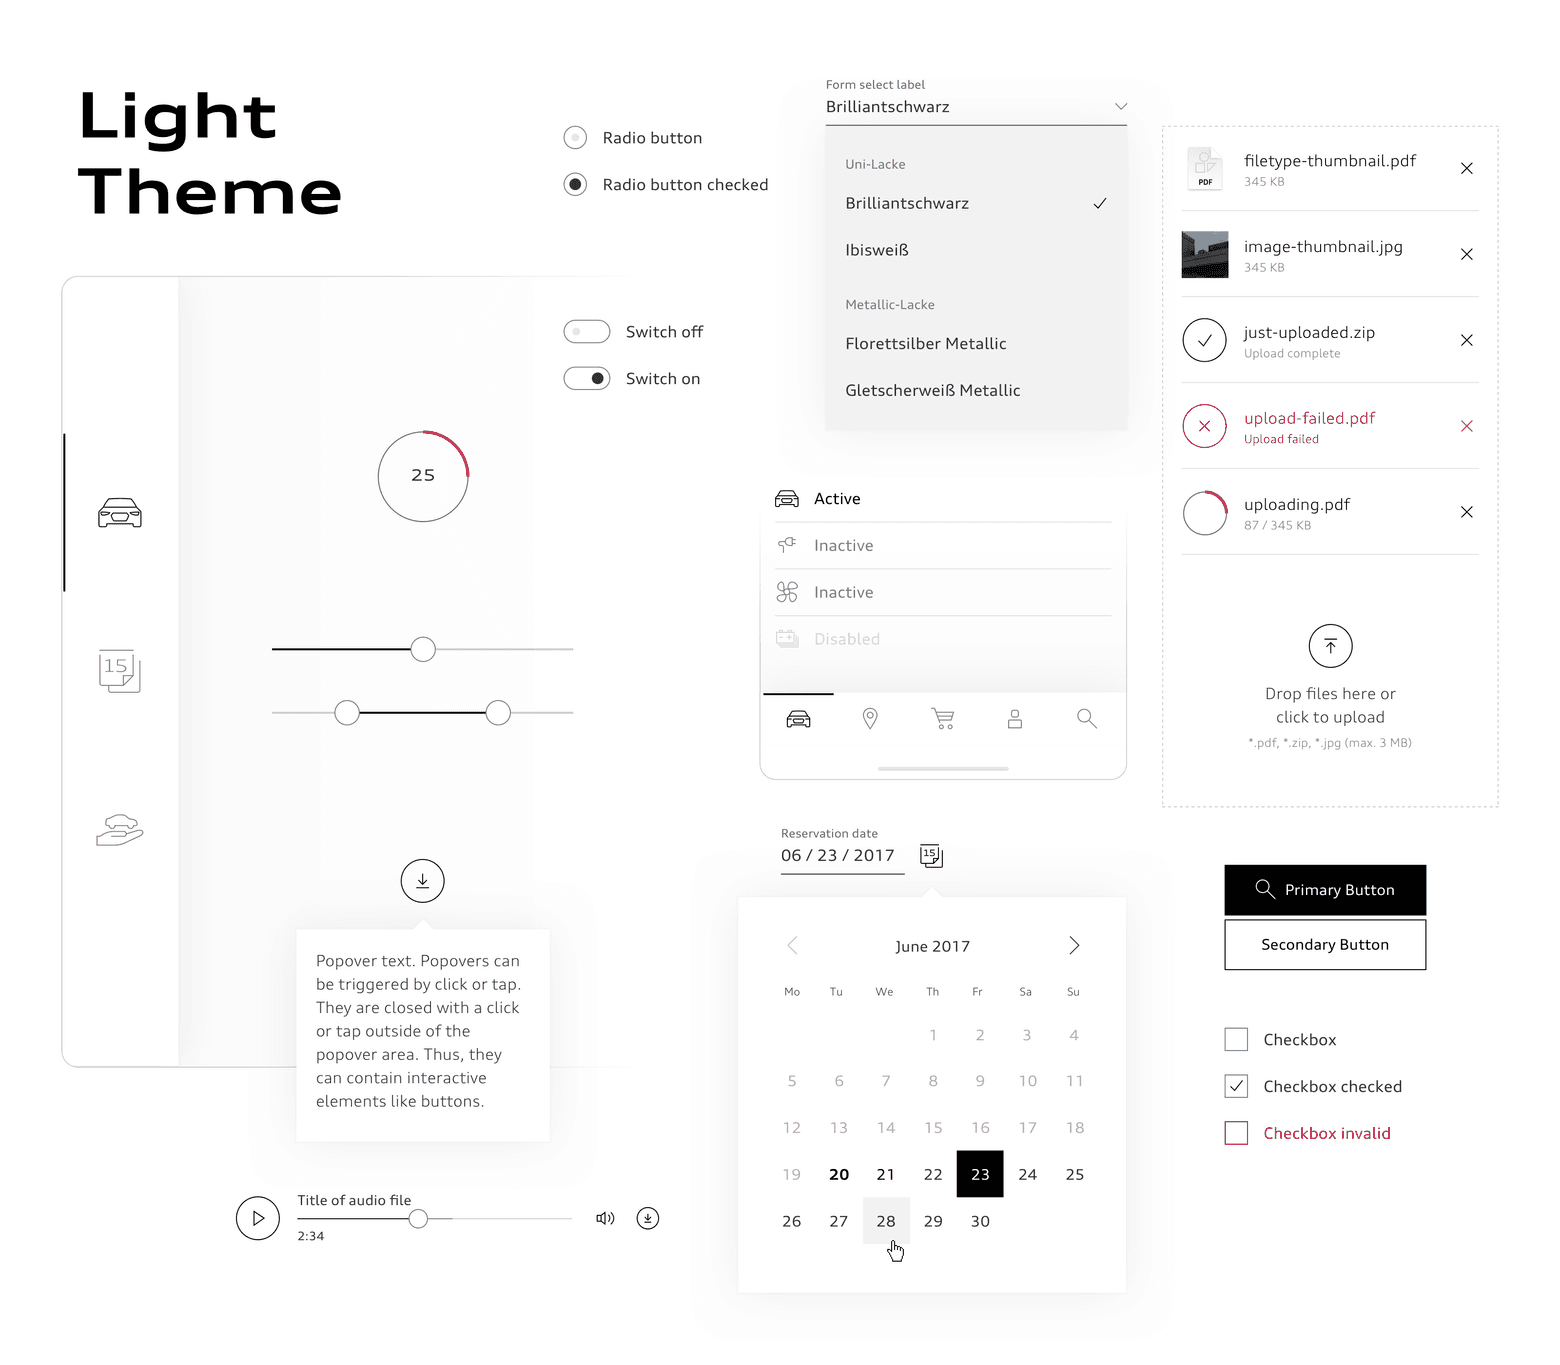 Audi interface components in light theme.